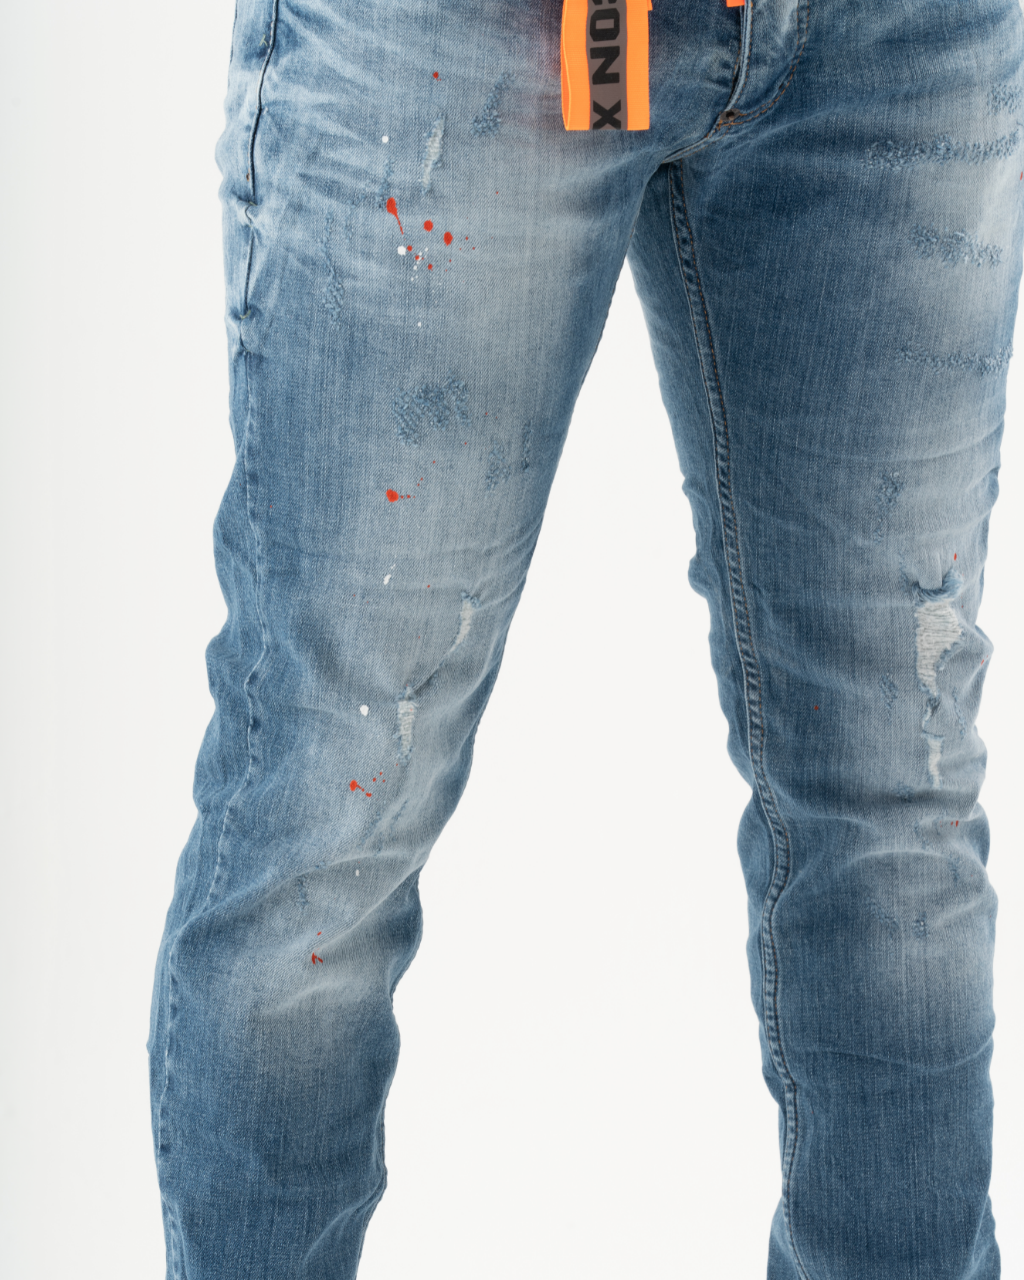 A man wearing a pair of TEZAR skinny fit jeans with orange paint splatters and patches.